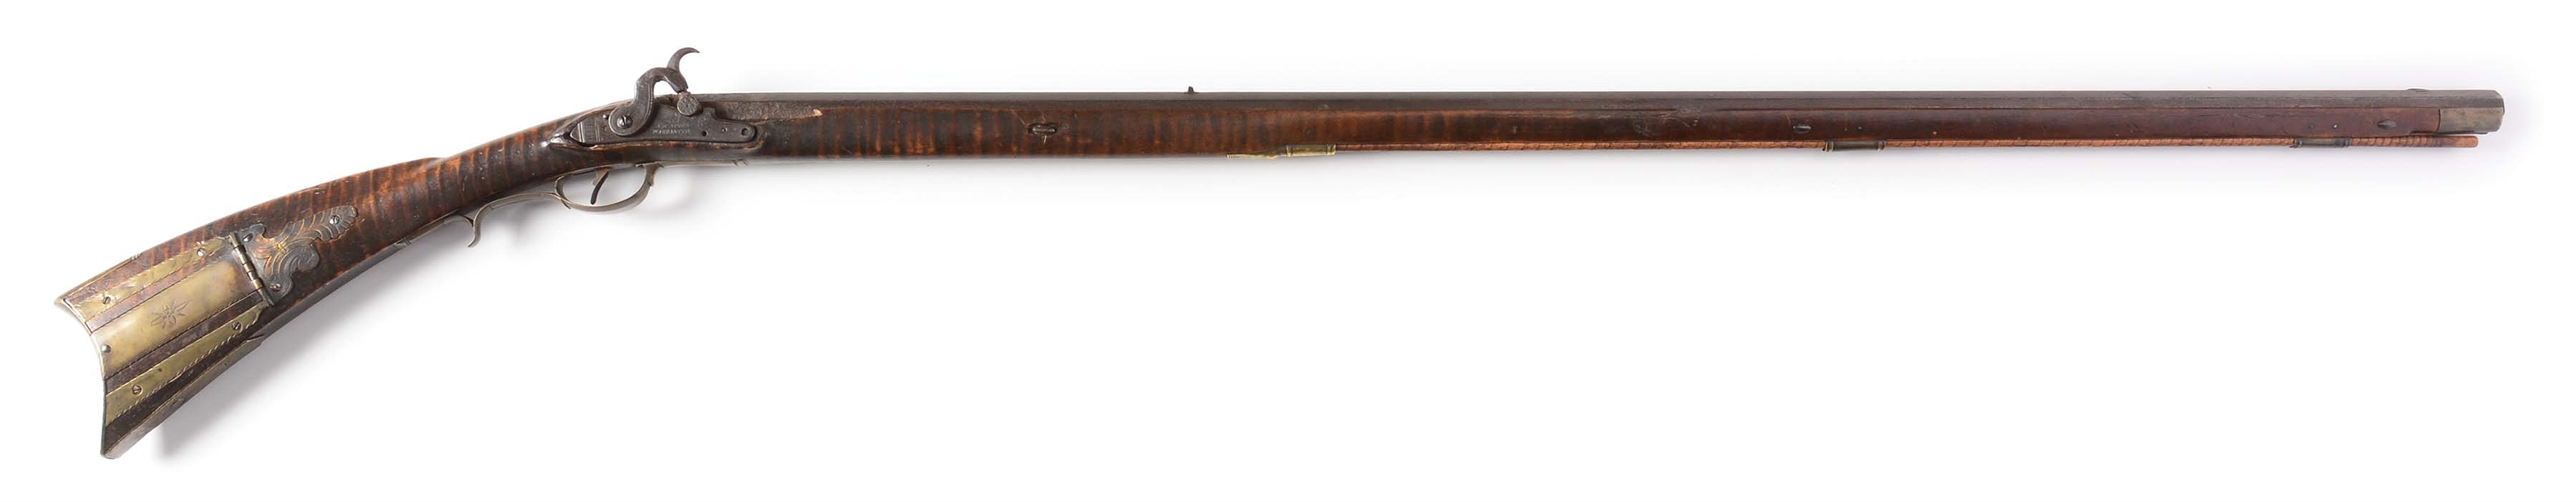 (A) FULLSTOCK MILITIA-STYLE PERCUSSION KENTUCKY RIFLE BY J.S. BAKER.